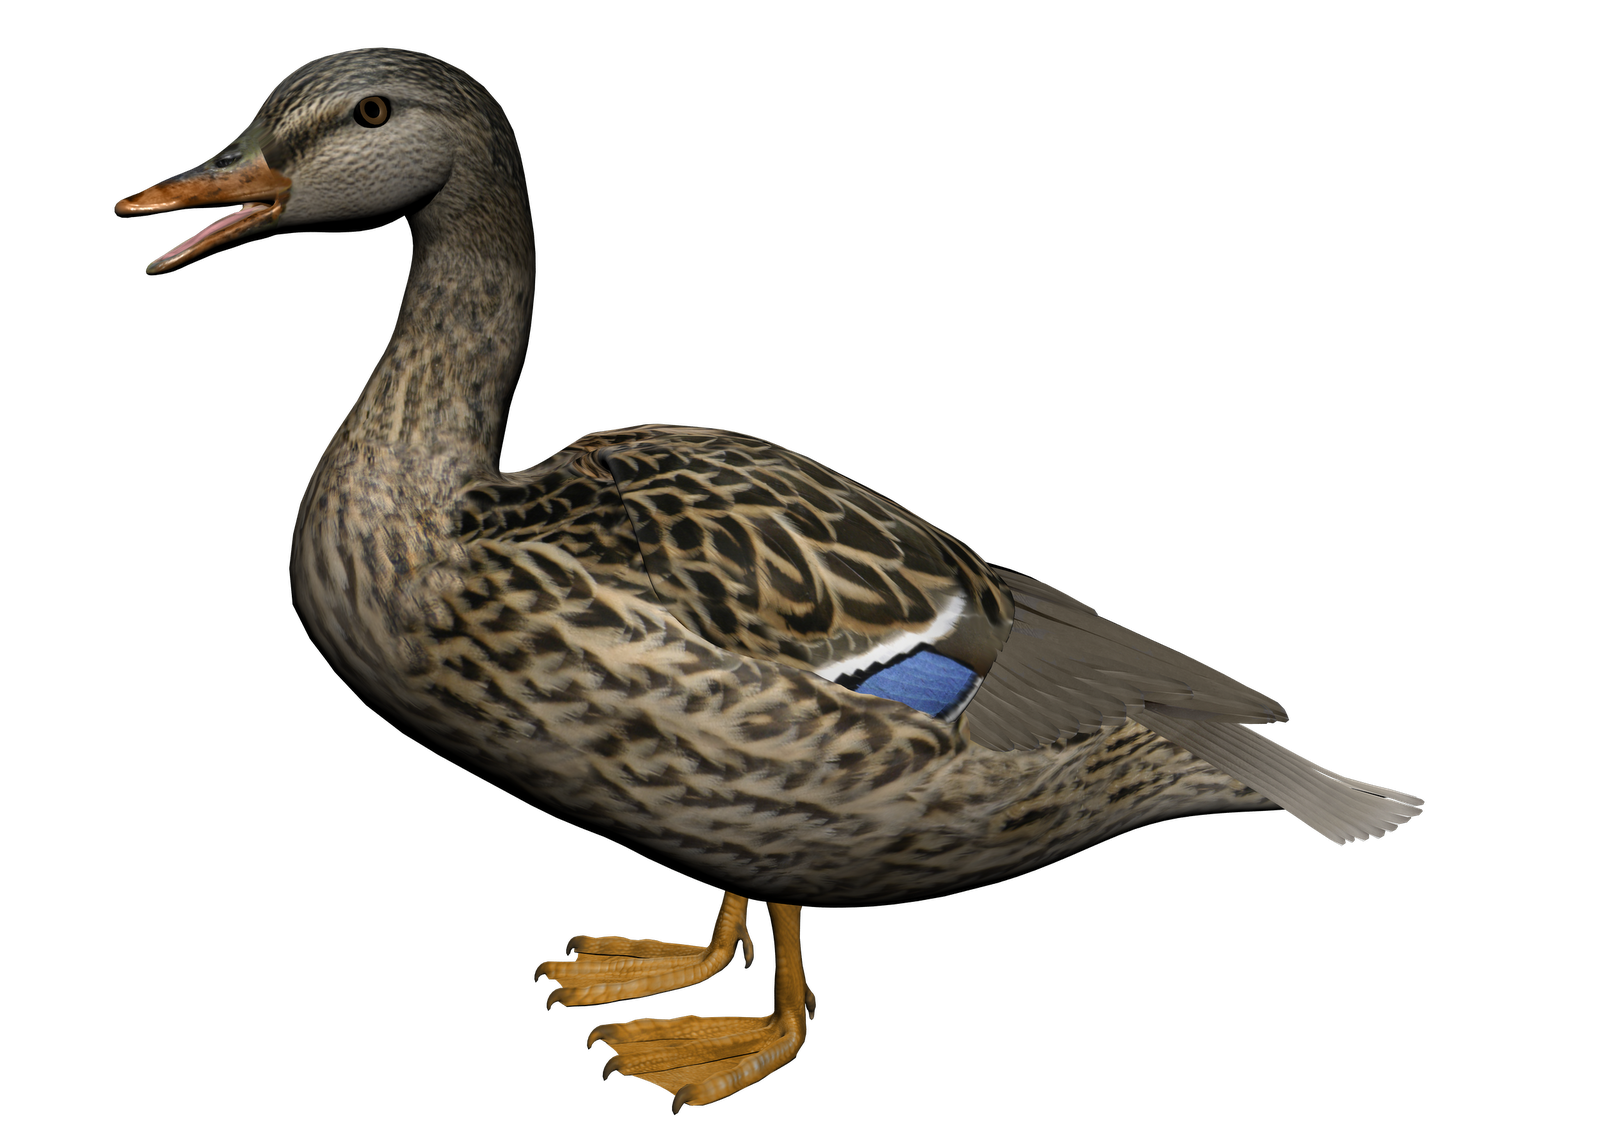 Duck PNG image